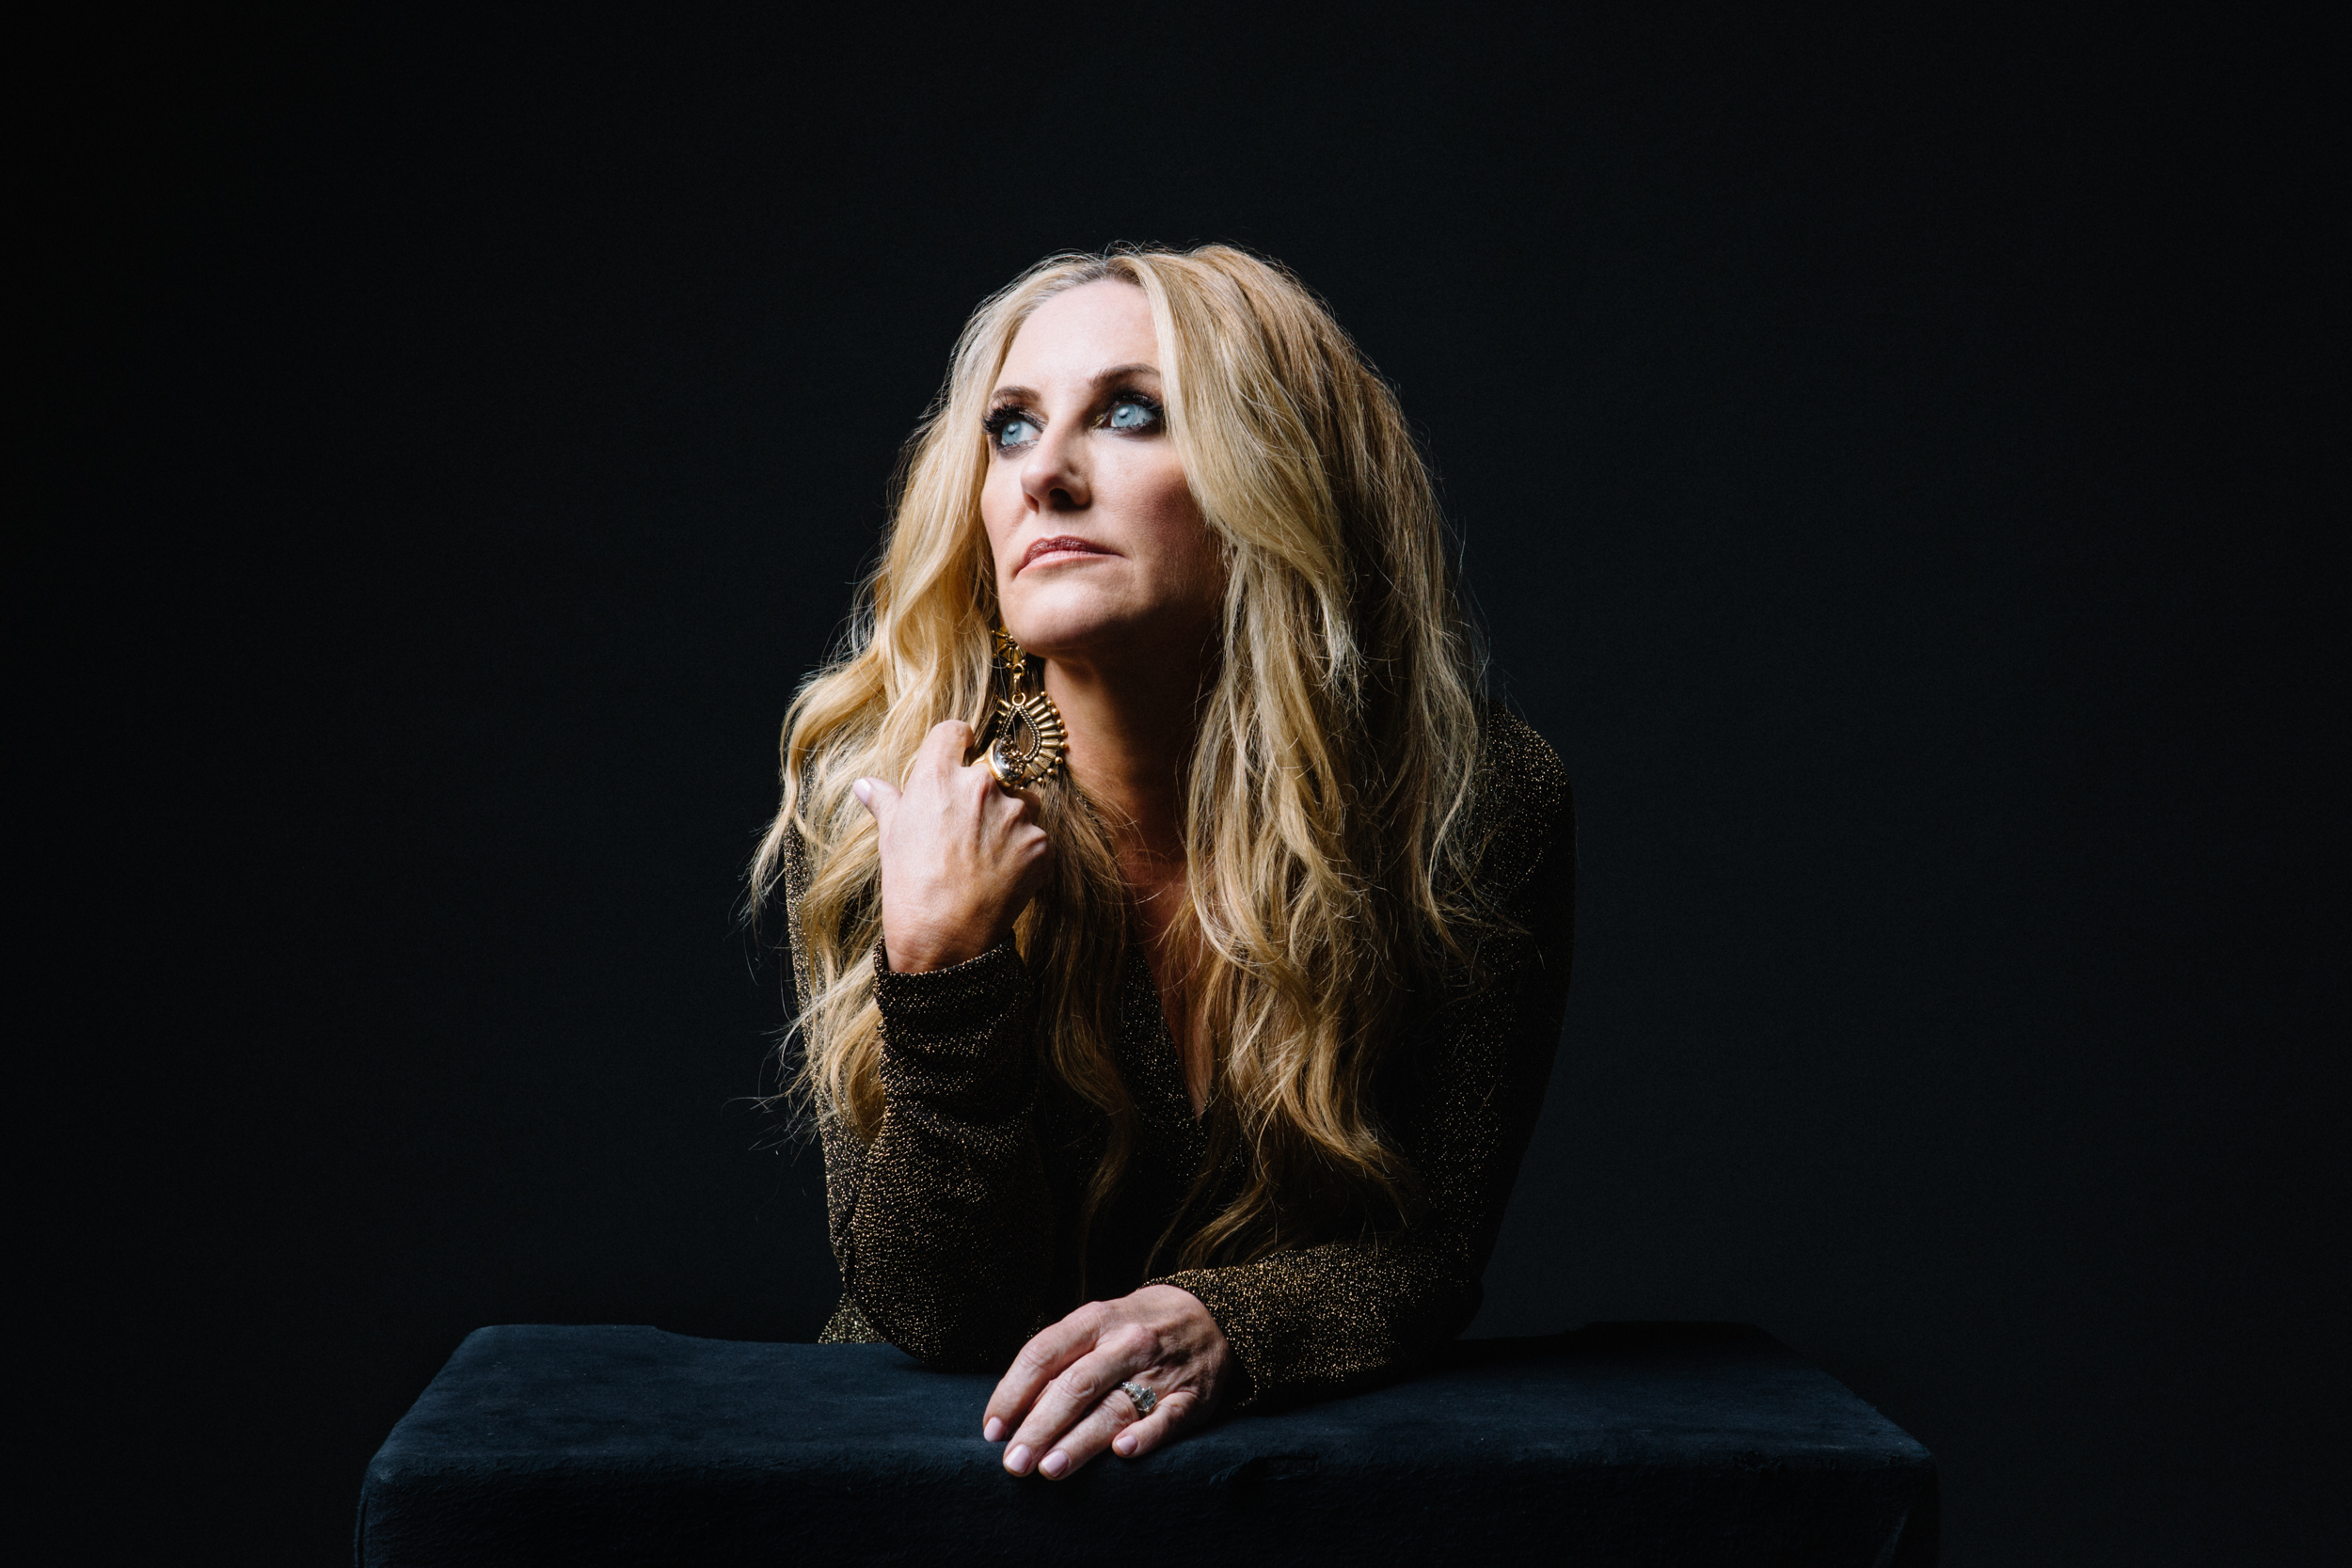 Photograph of Lee Ann Womack